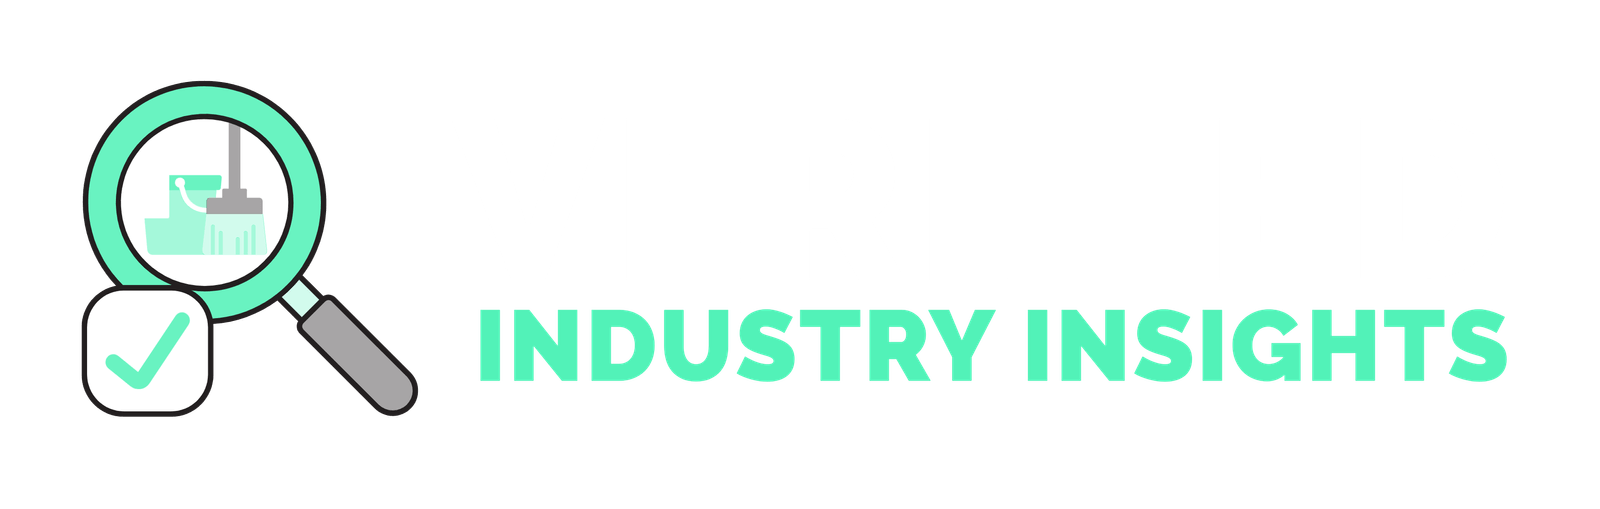 Verified Industry Insights